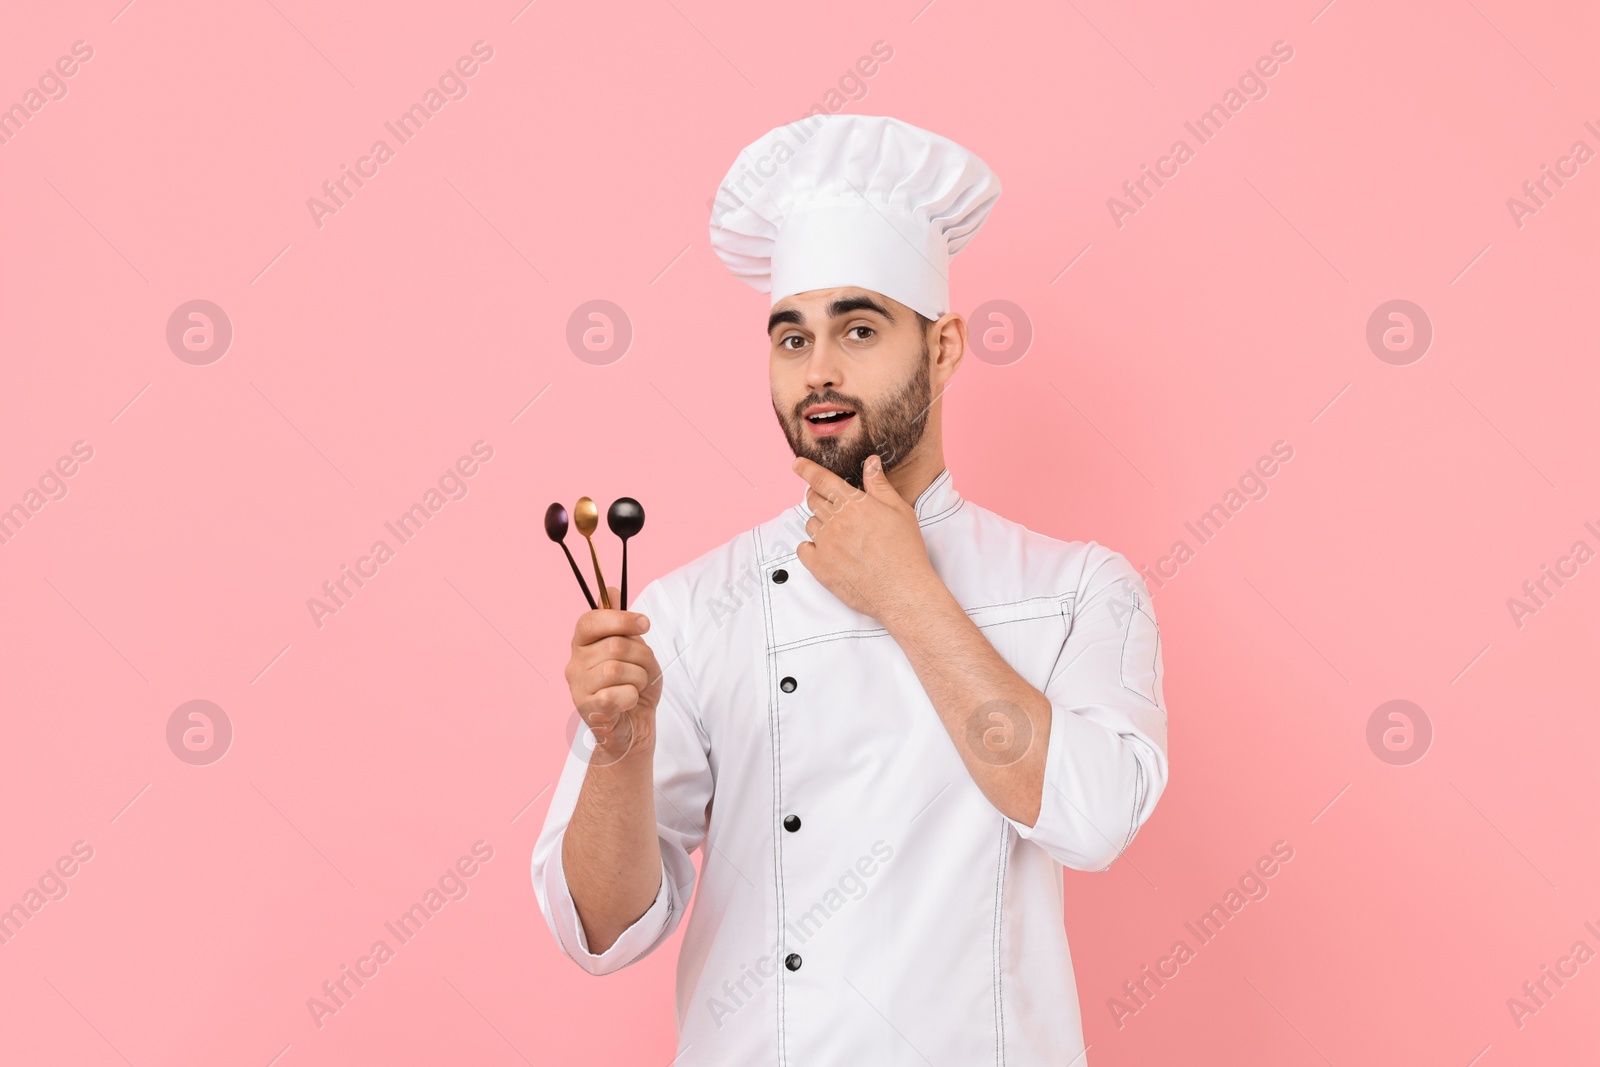 Photo of Professional chef holding kitchen utensils on pink background